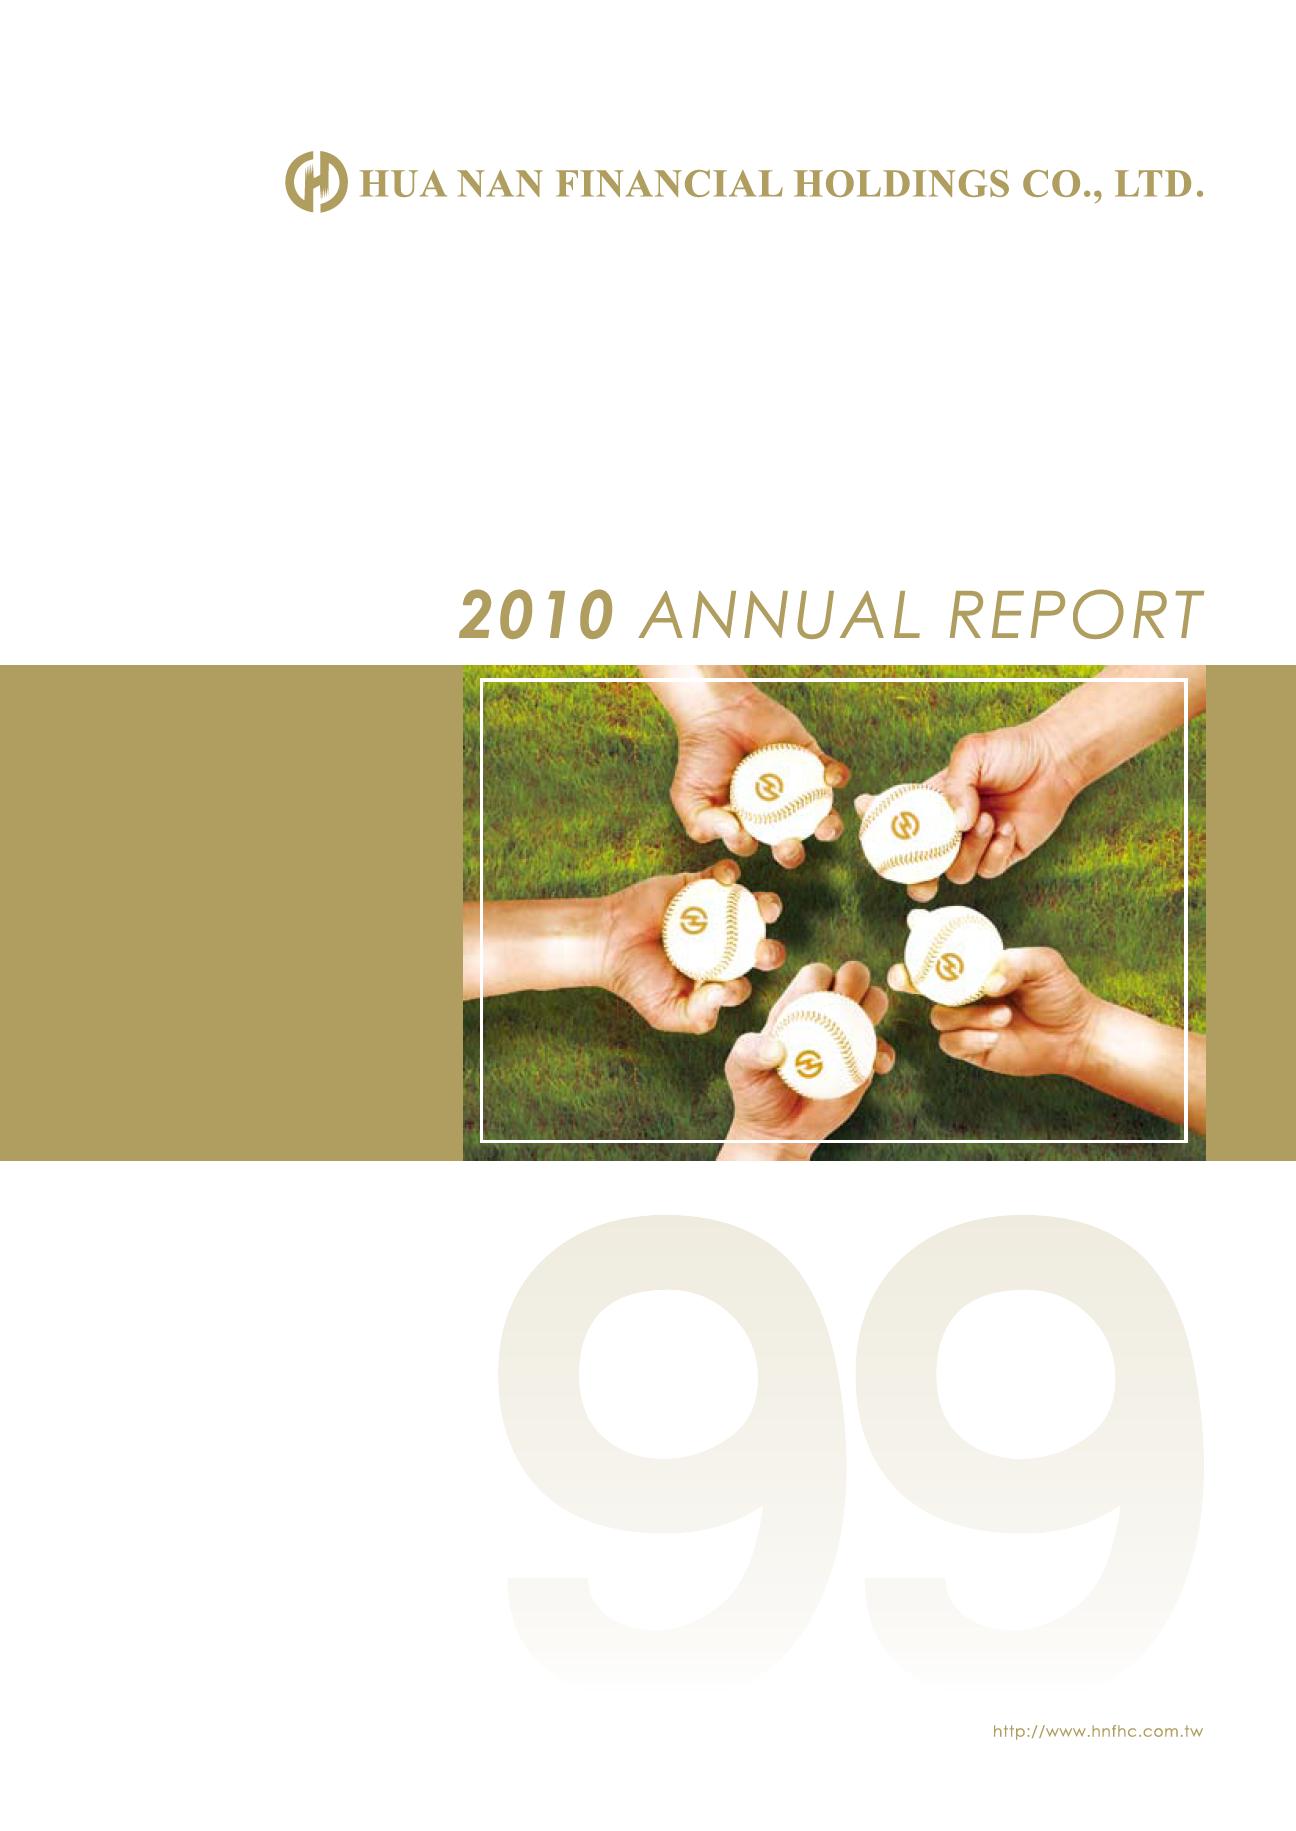 The cover of 2010 Annual Reports